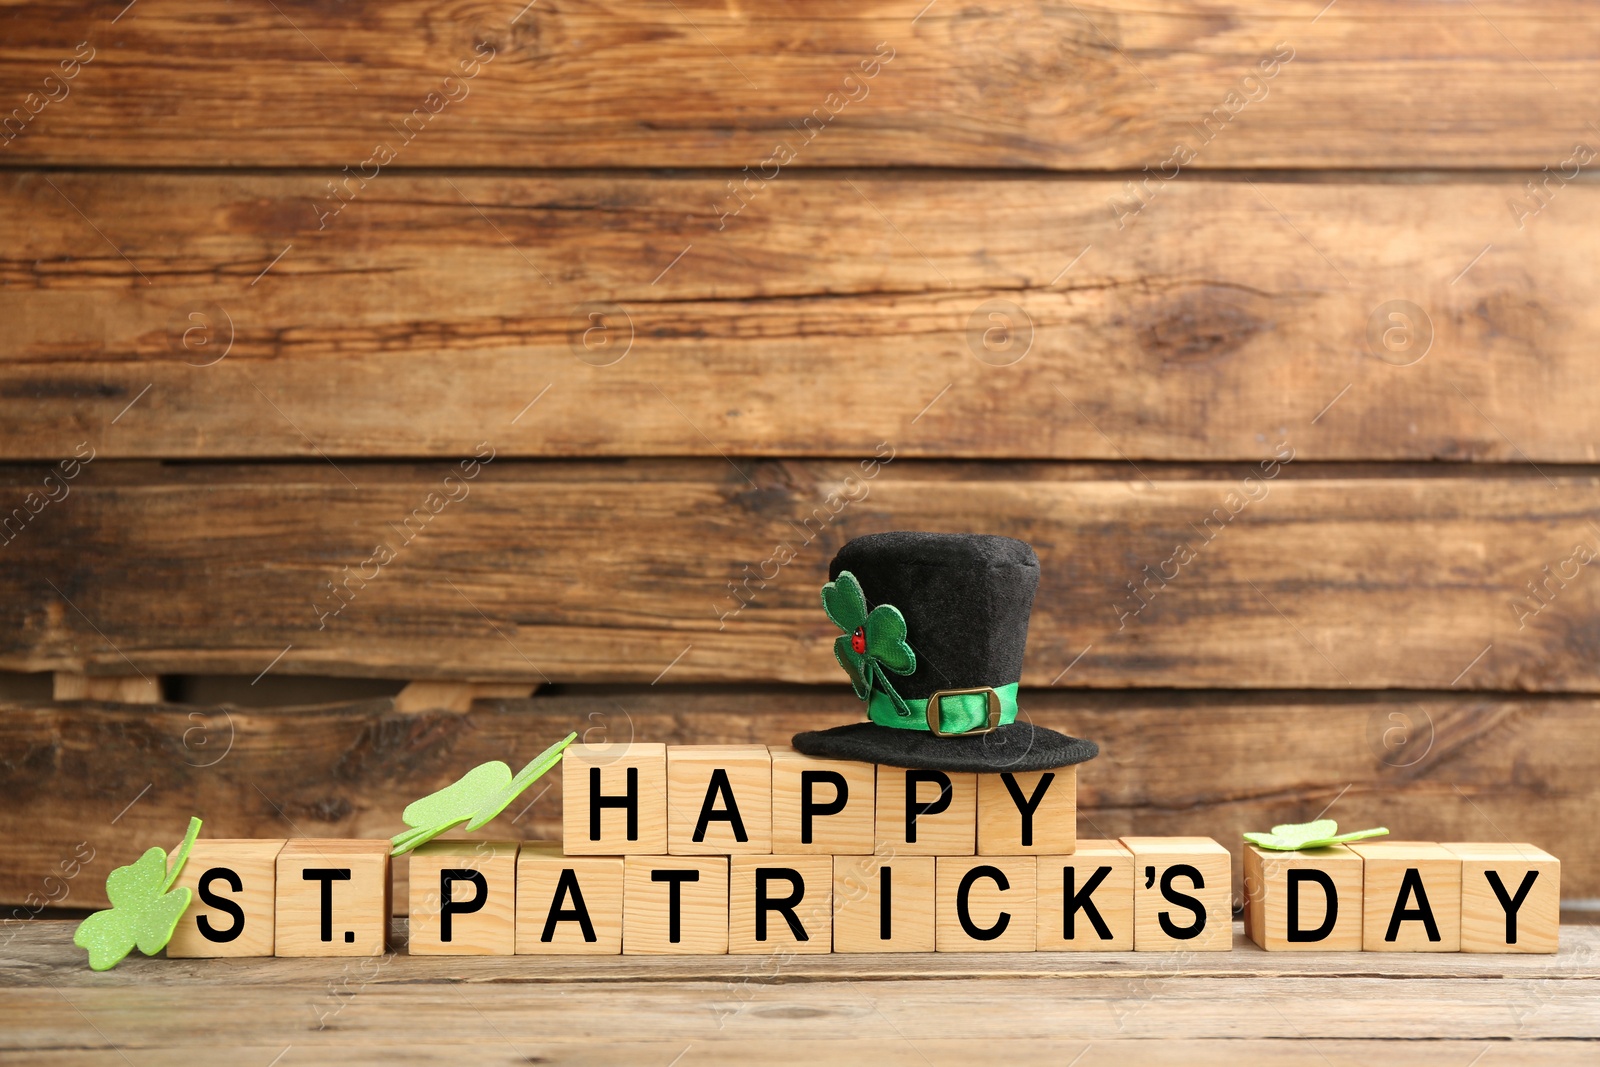 Photo of Words Happy St. Patrick's day and festive decor on wooden background. Space for text